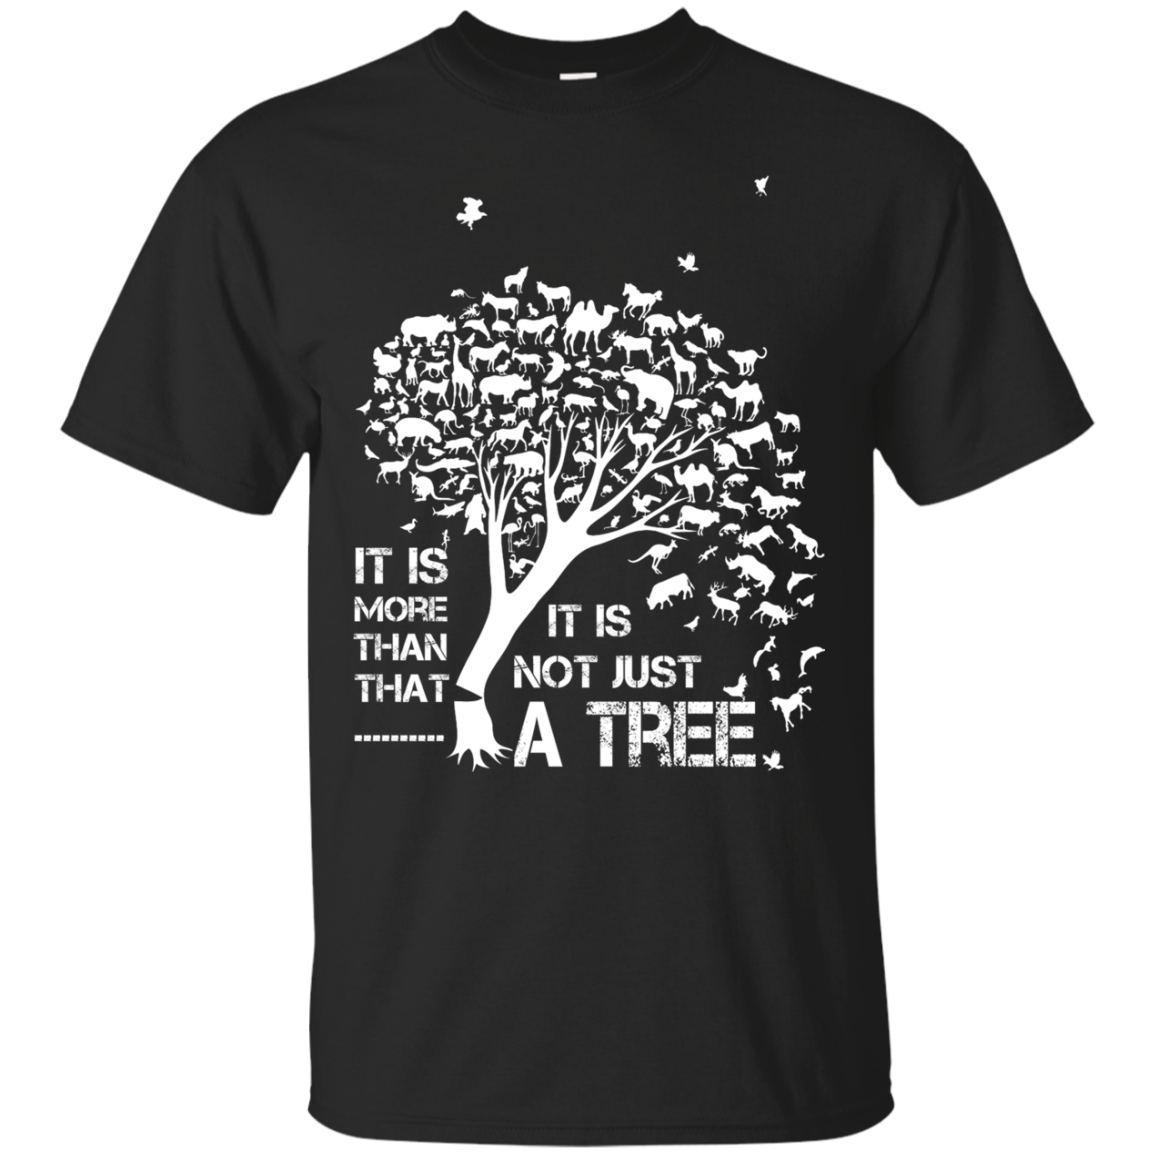 It is not just a tree - It is more than that shirt, hoodie